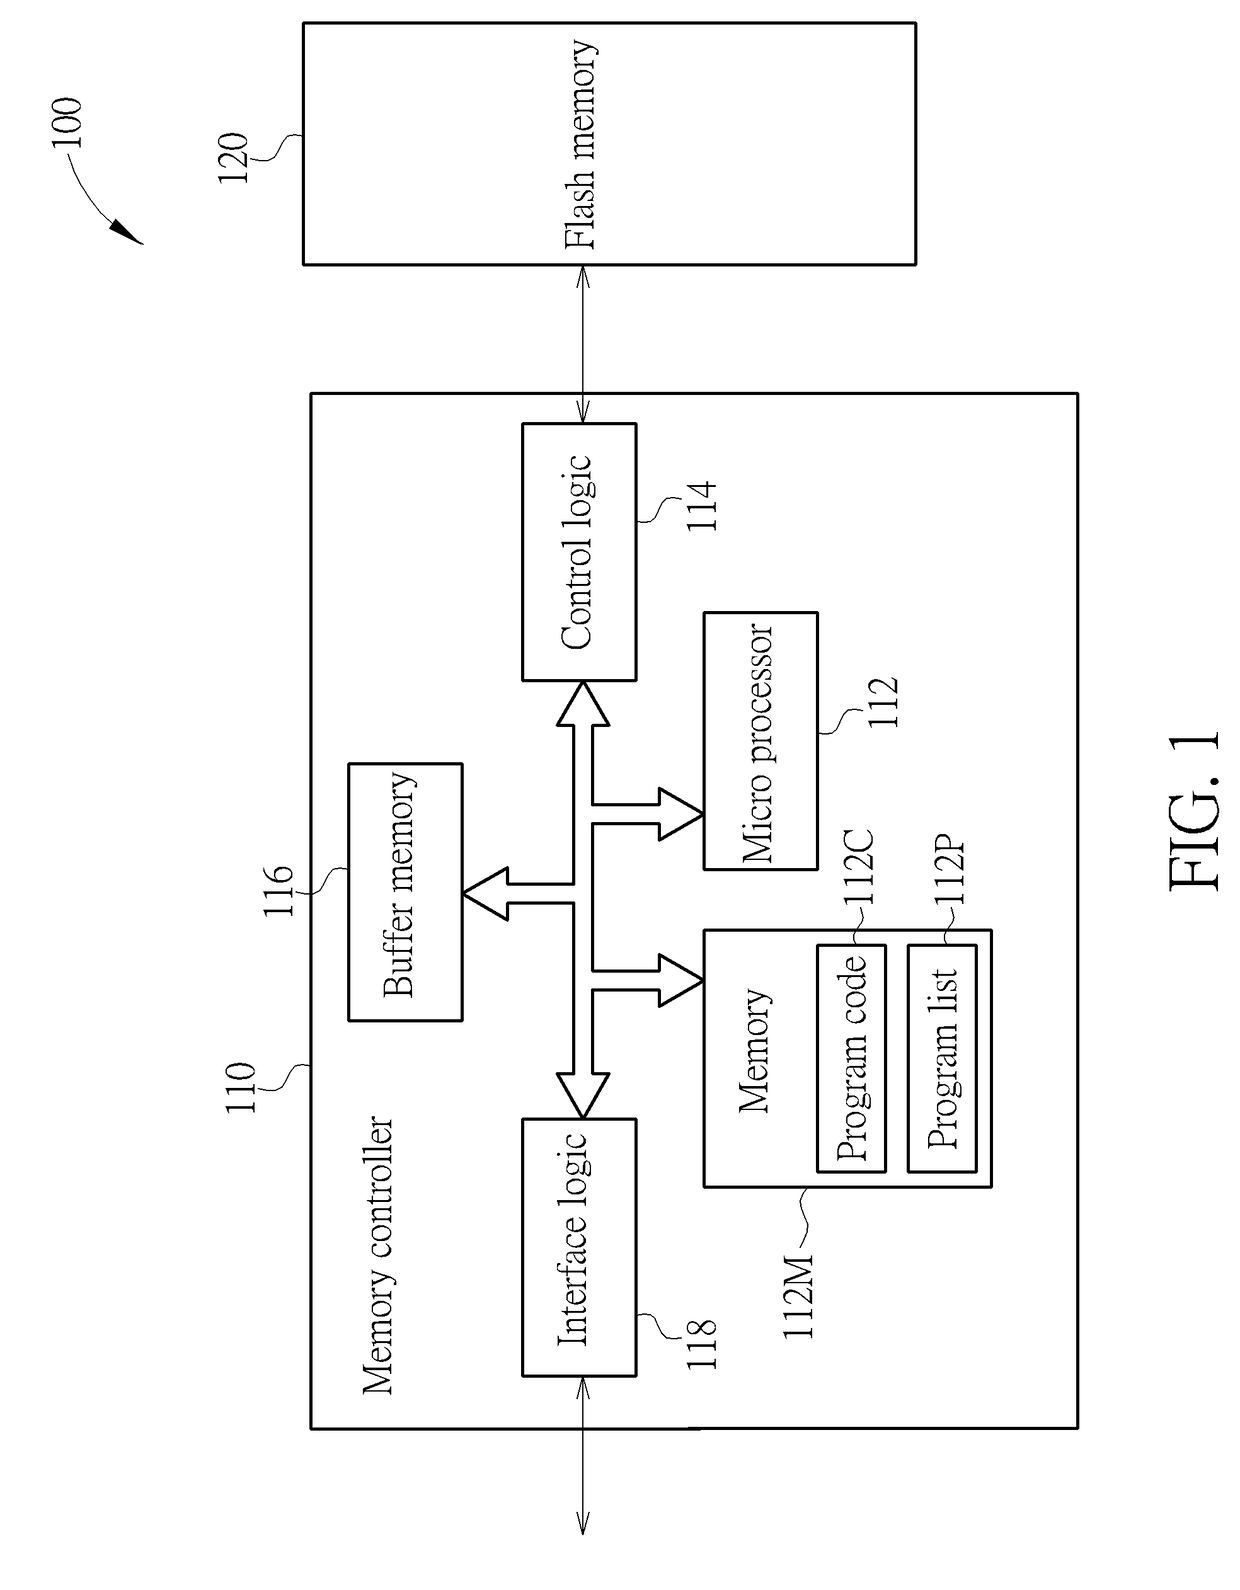 Method for managing data stored in flash memory and associated memory device and controller